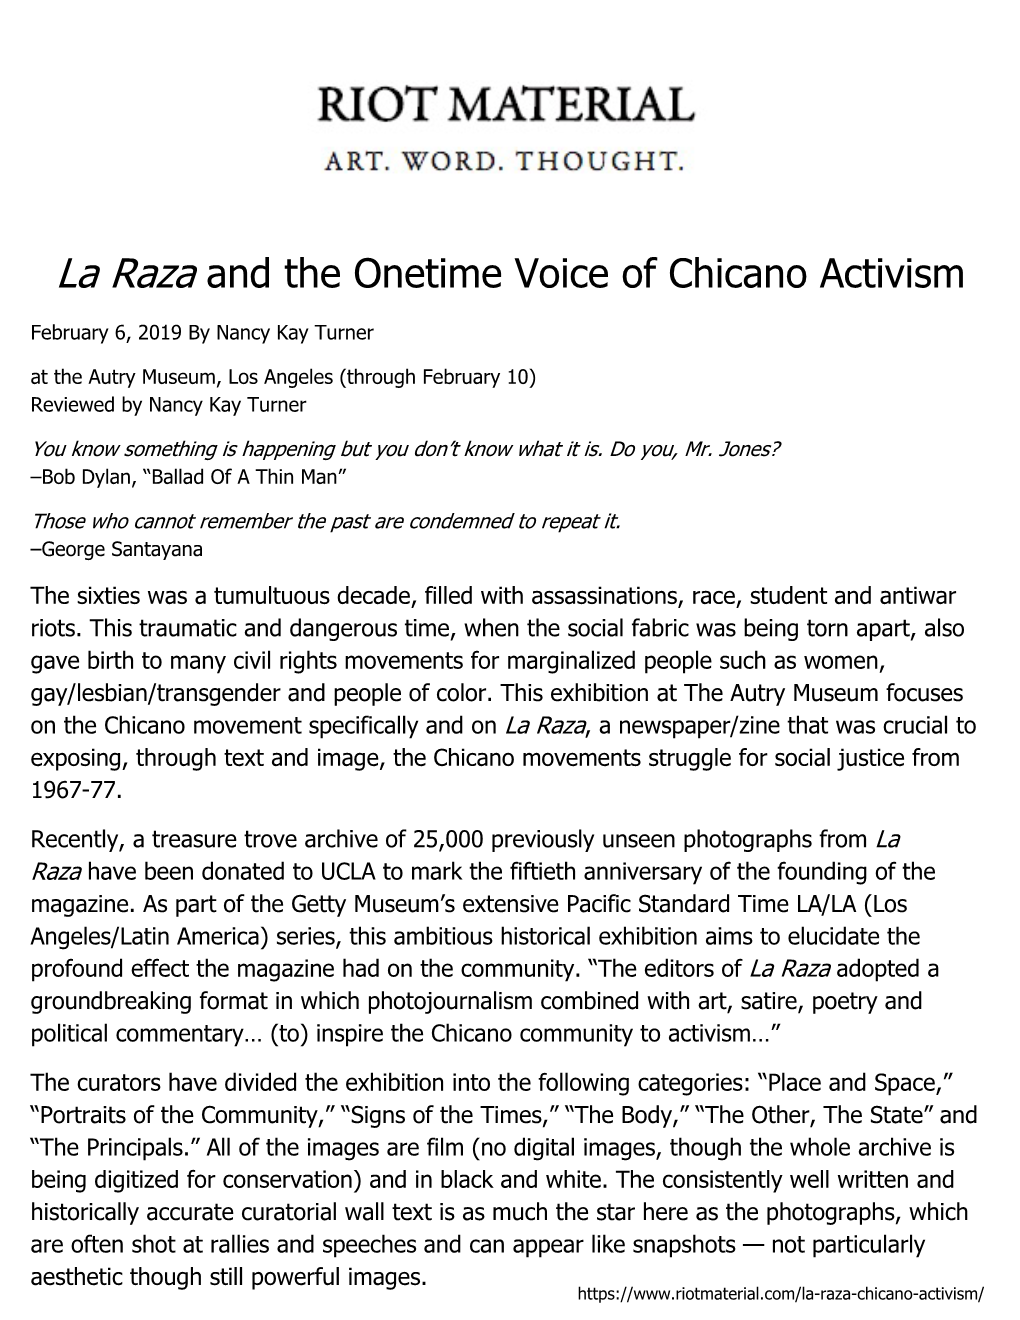 La Raza and the Onetime Voice of Chicano Activism